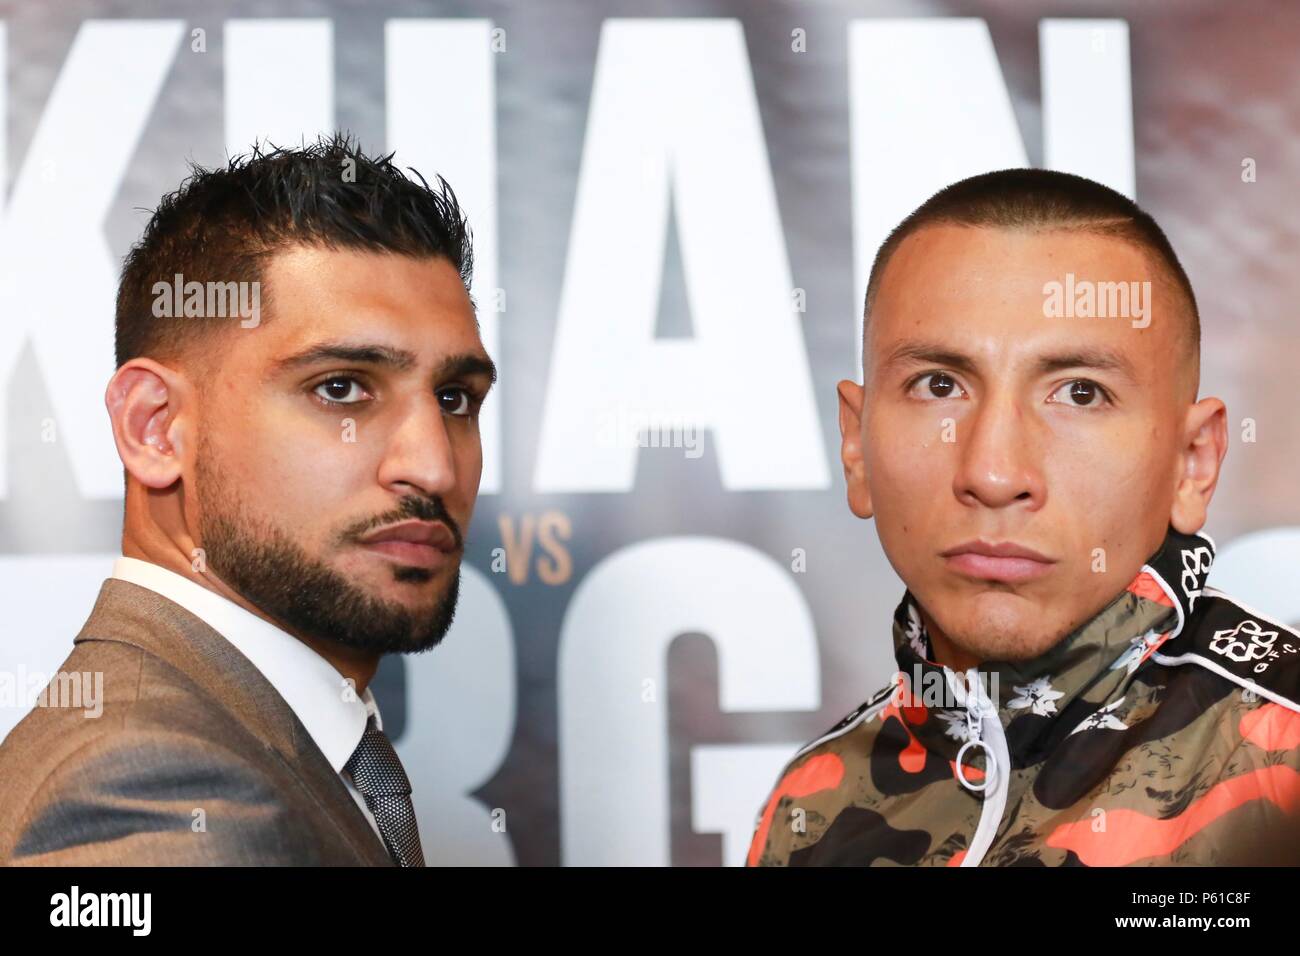 Birmingham, UK. 28th June, 2018. Welterweight boxer Amir Khan comes face to face with Samuel Vargas his next opponent, ahead of the fight at the Arena Birmingham on September 8th, 2018. Peter Lopeman/Alamy Live News Stock Photo